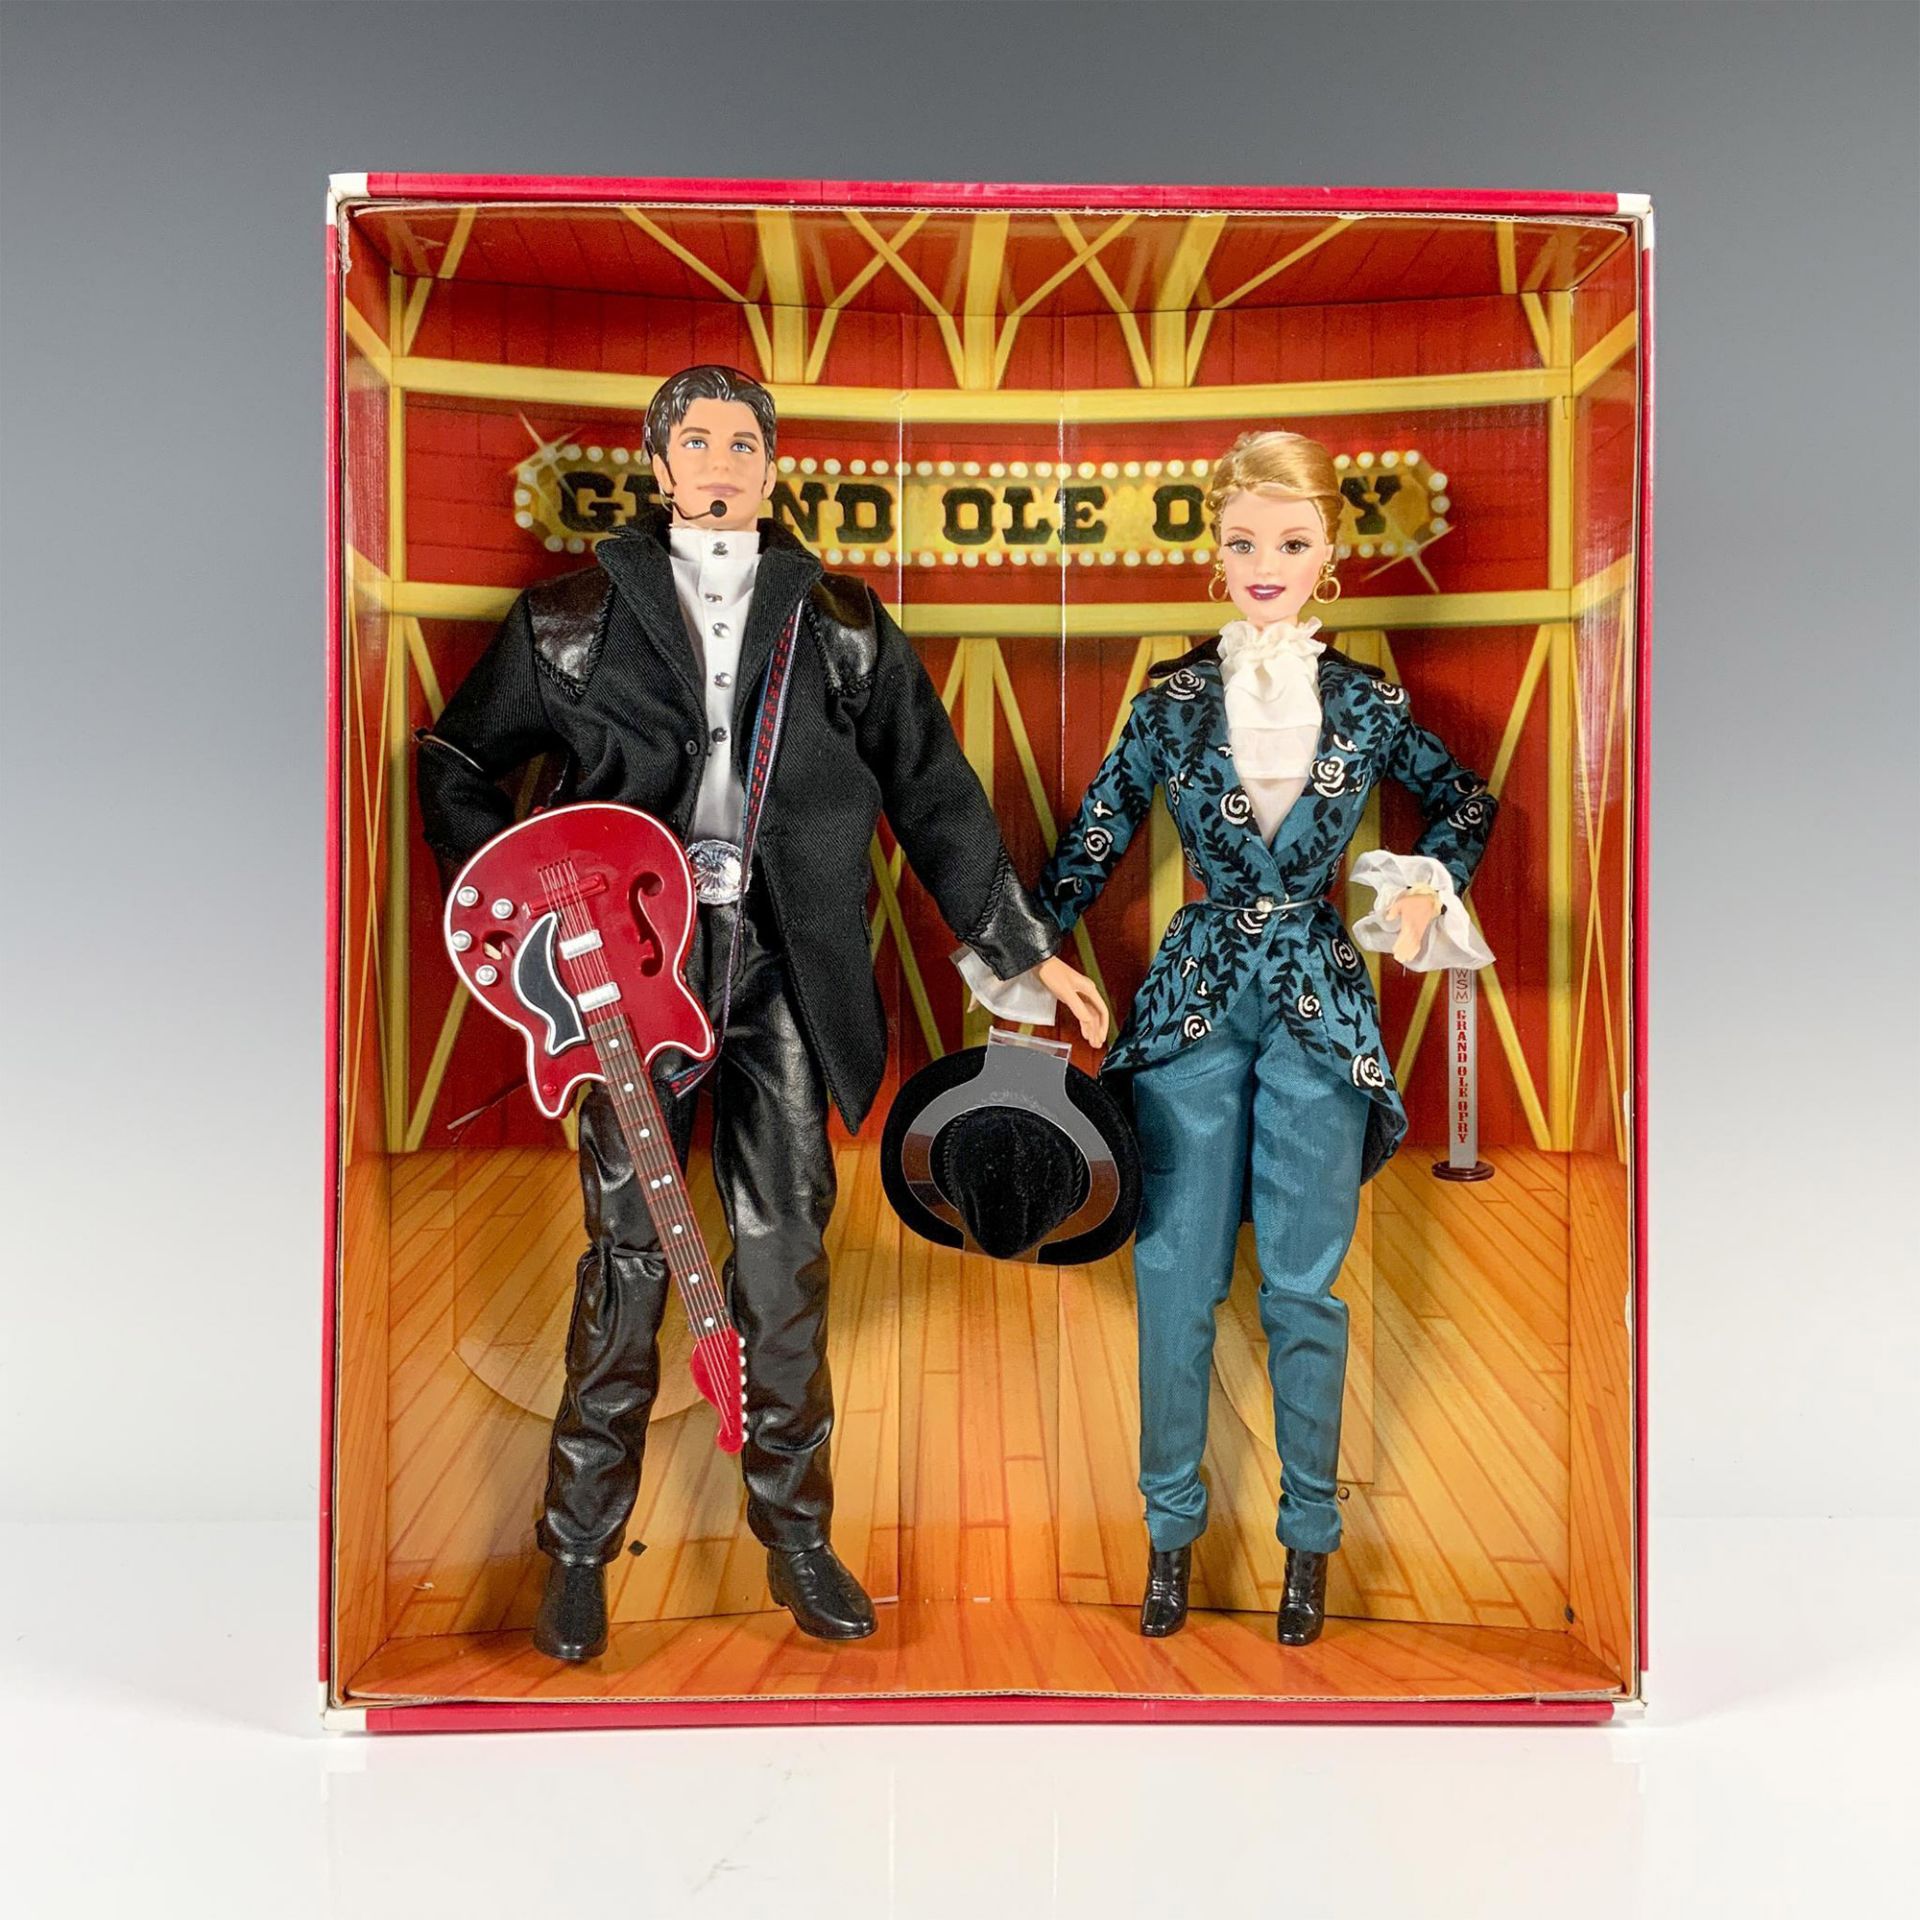 Mattel Barbie and Kenny Doll, Country Duet